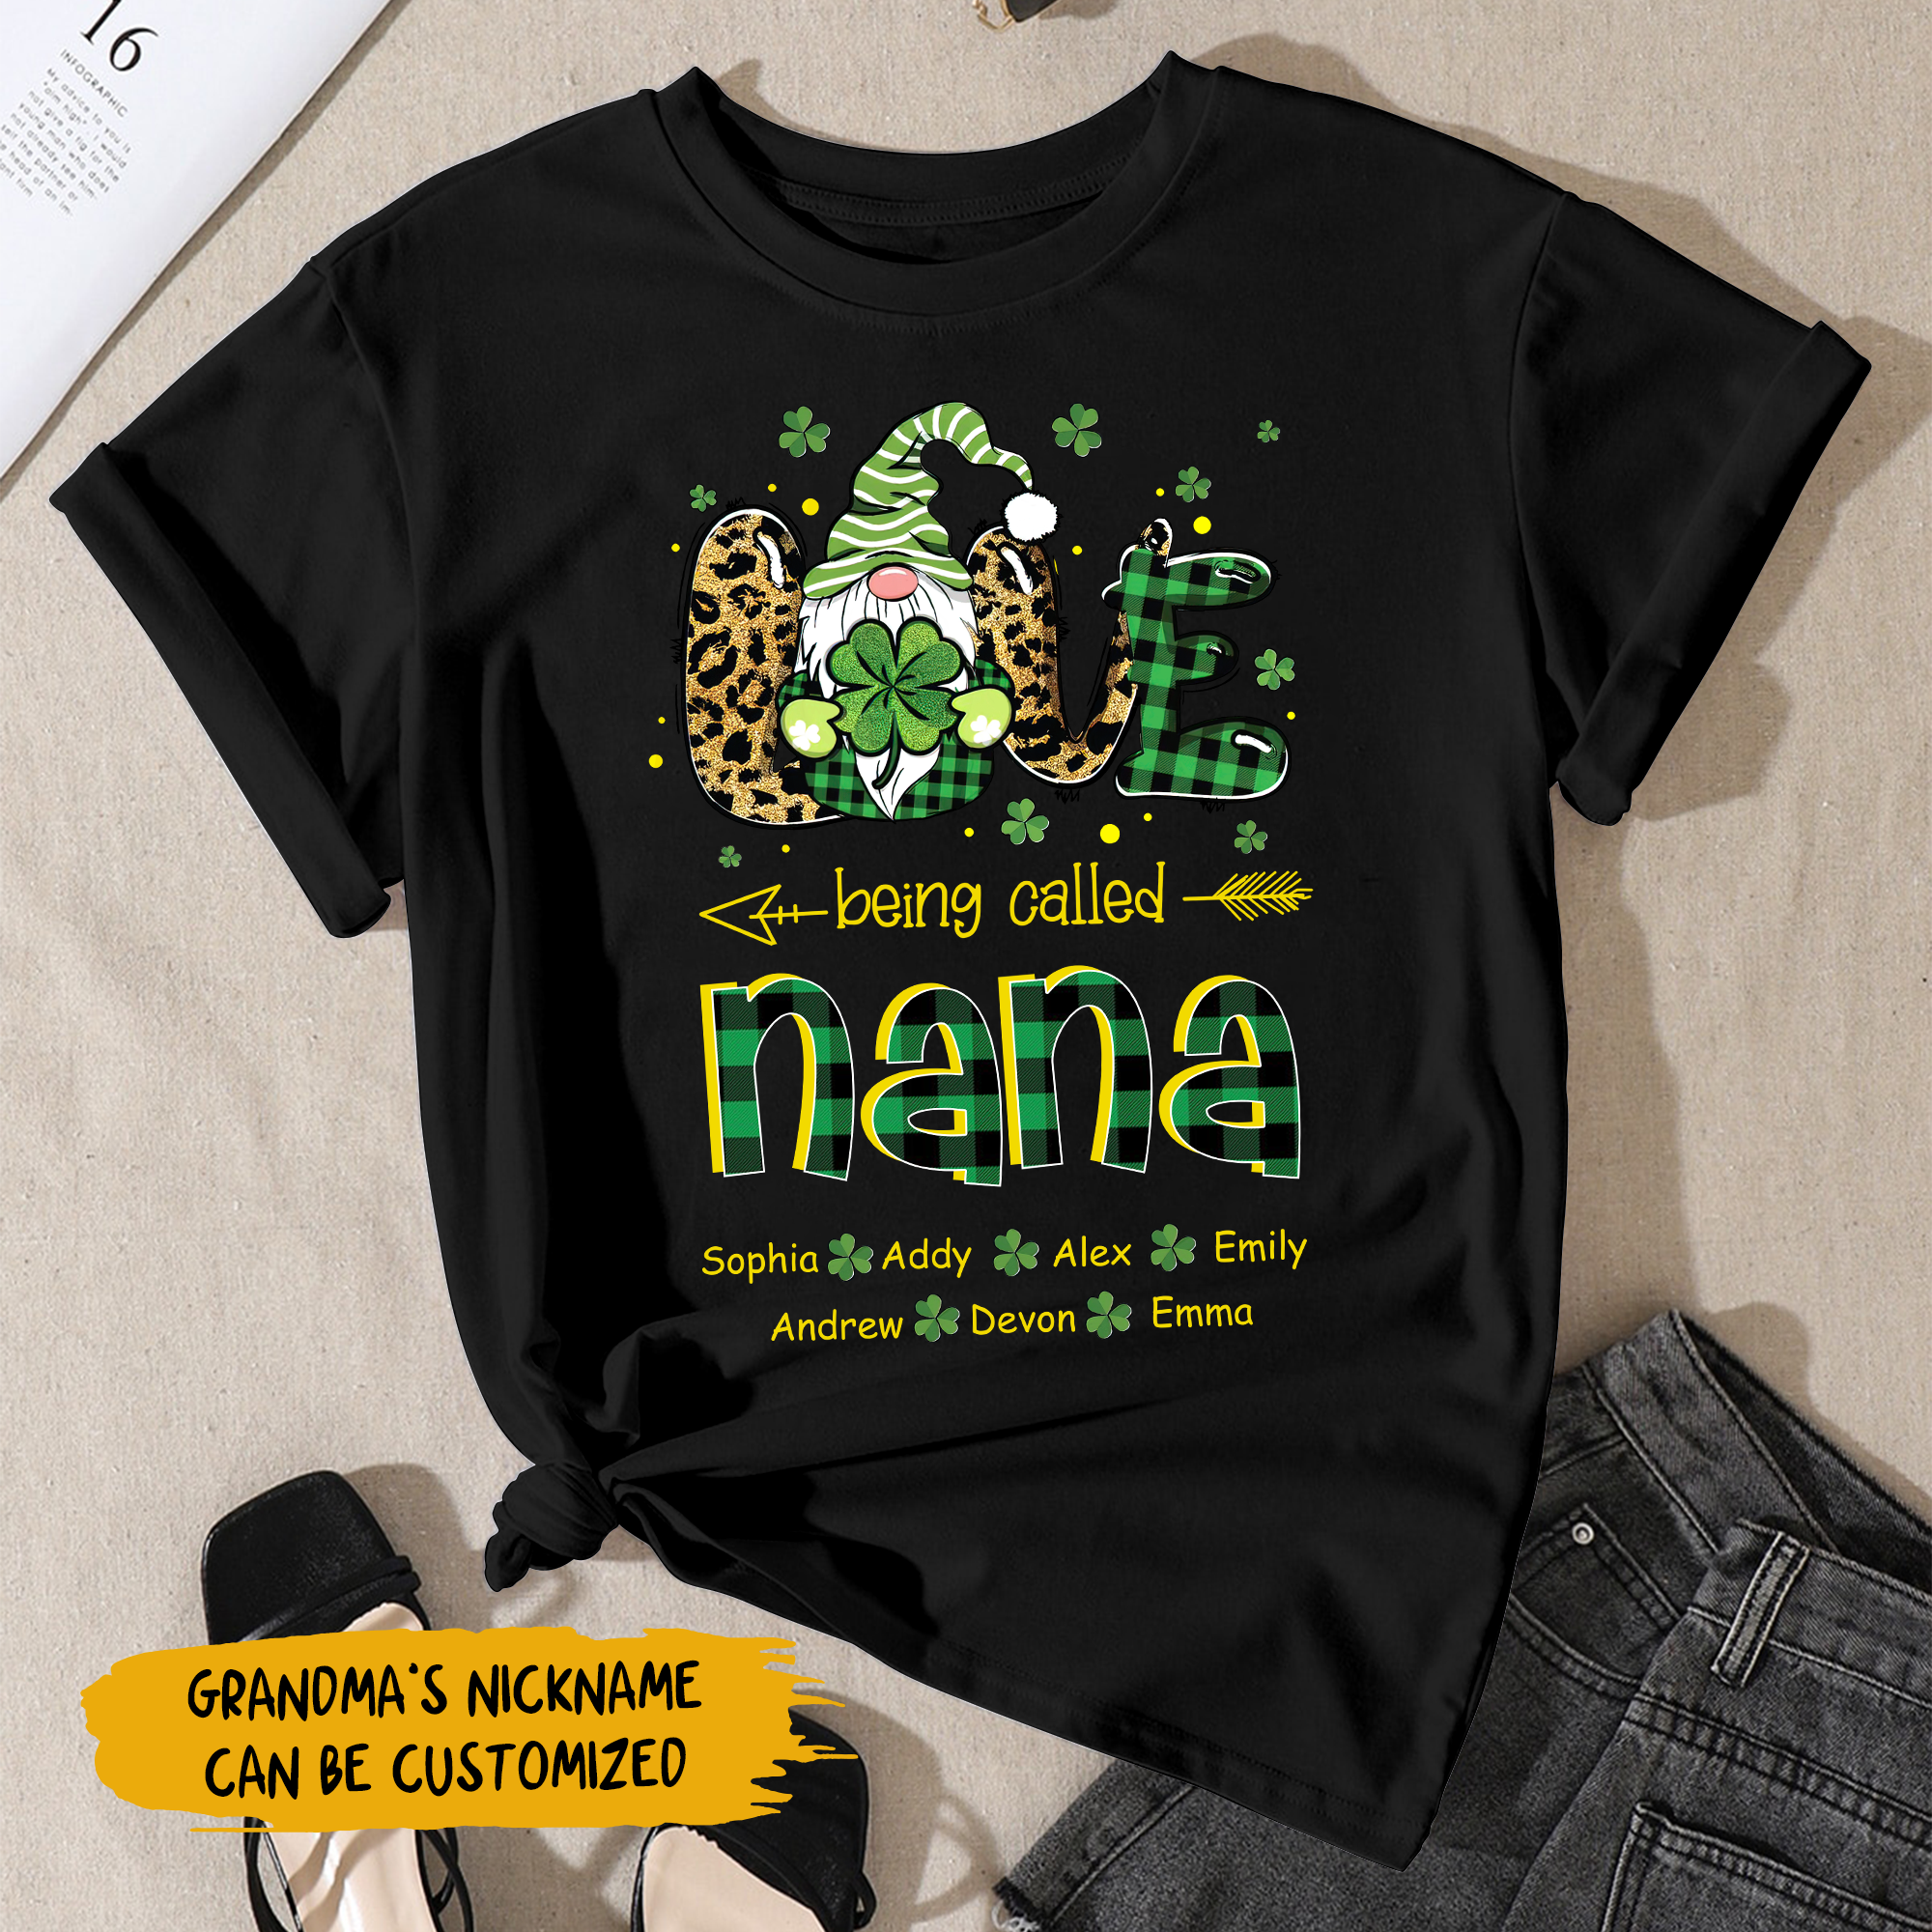 Personalized T-shirt - Gift For Grandma - Love Being Called Nana St Patrick's Day